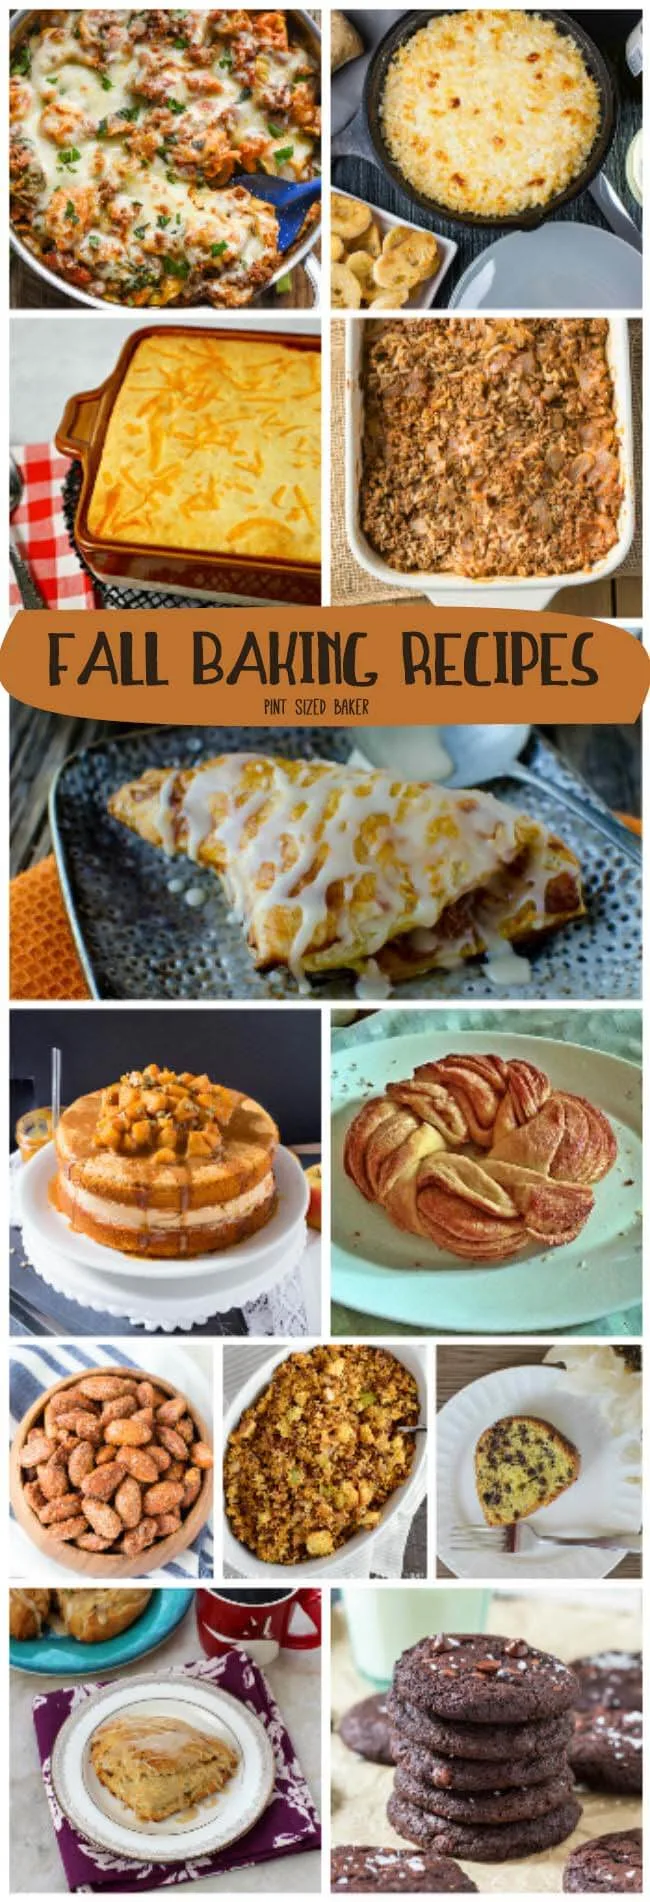 Do the cold, short nights lend themselves to more baking fresh breads, roasted veggies, and casseroles in your household? If so, here's 15 Fall Baking Recipes that are perfect for breakfast, lunch, dinner and dessert!